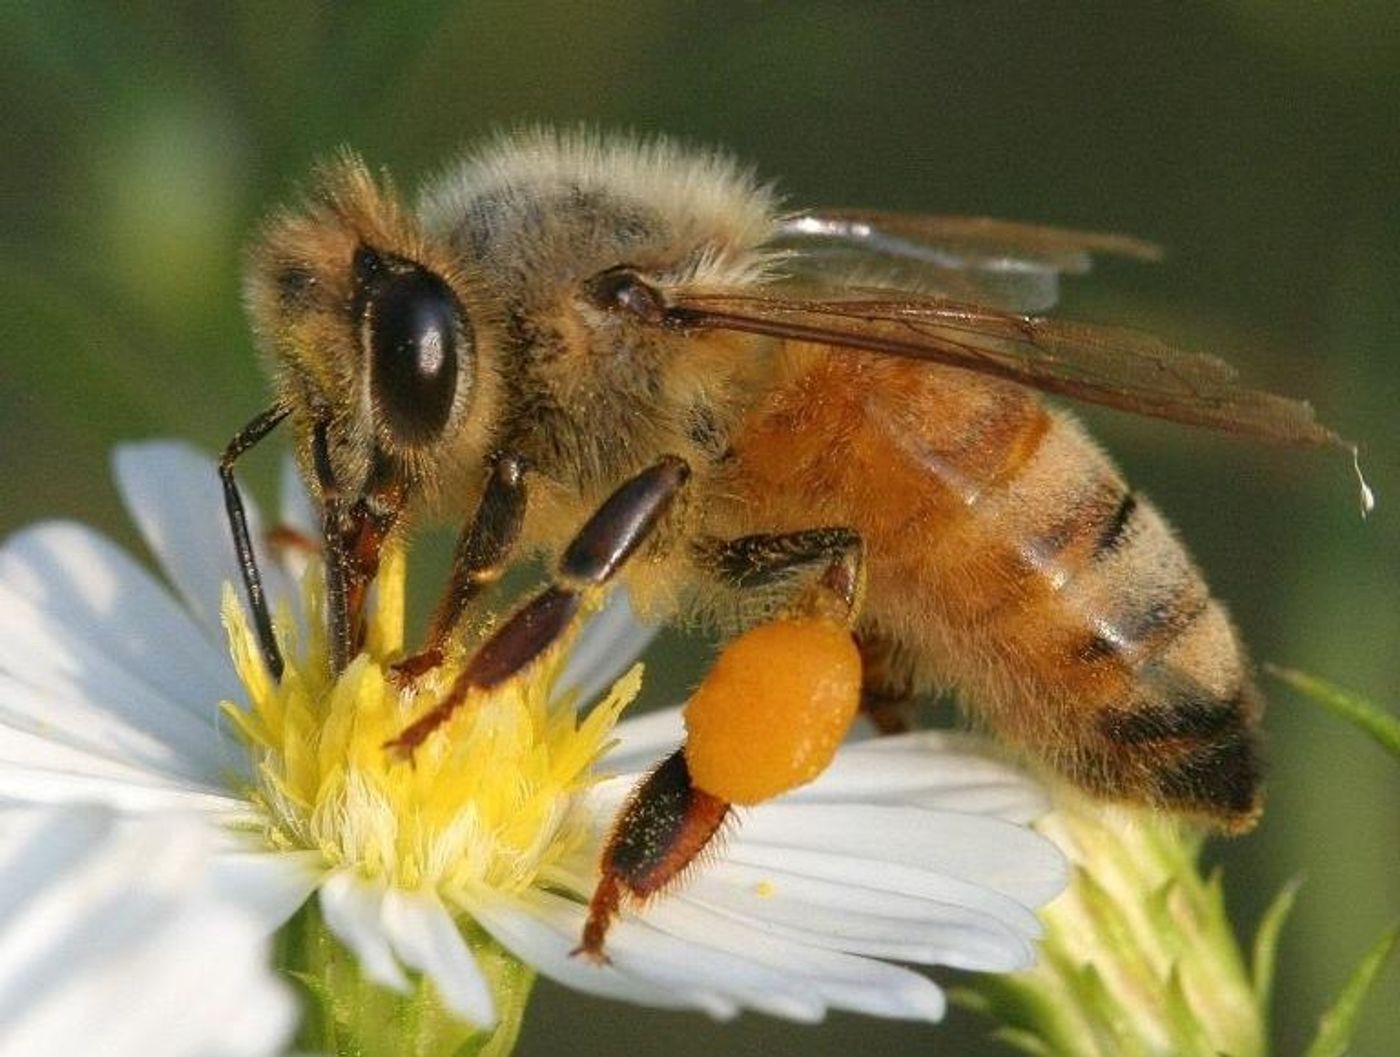 Honey bees pollinate many crops.